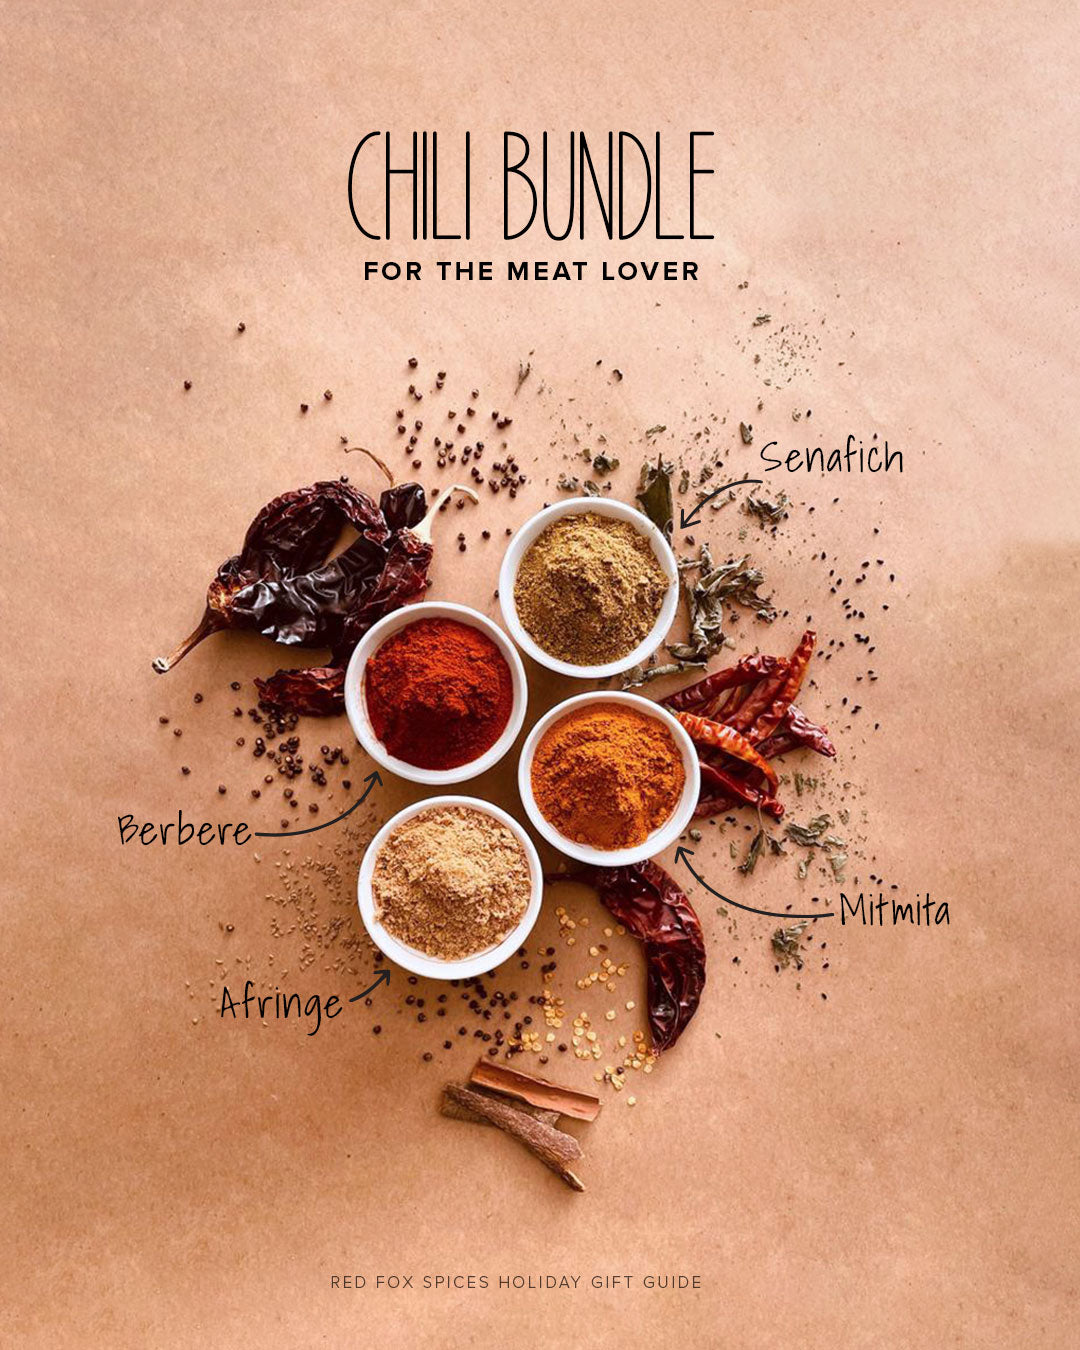 Chili Bundle: For the Meat Lover